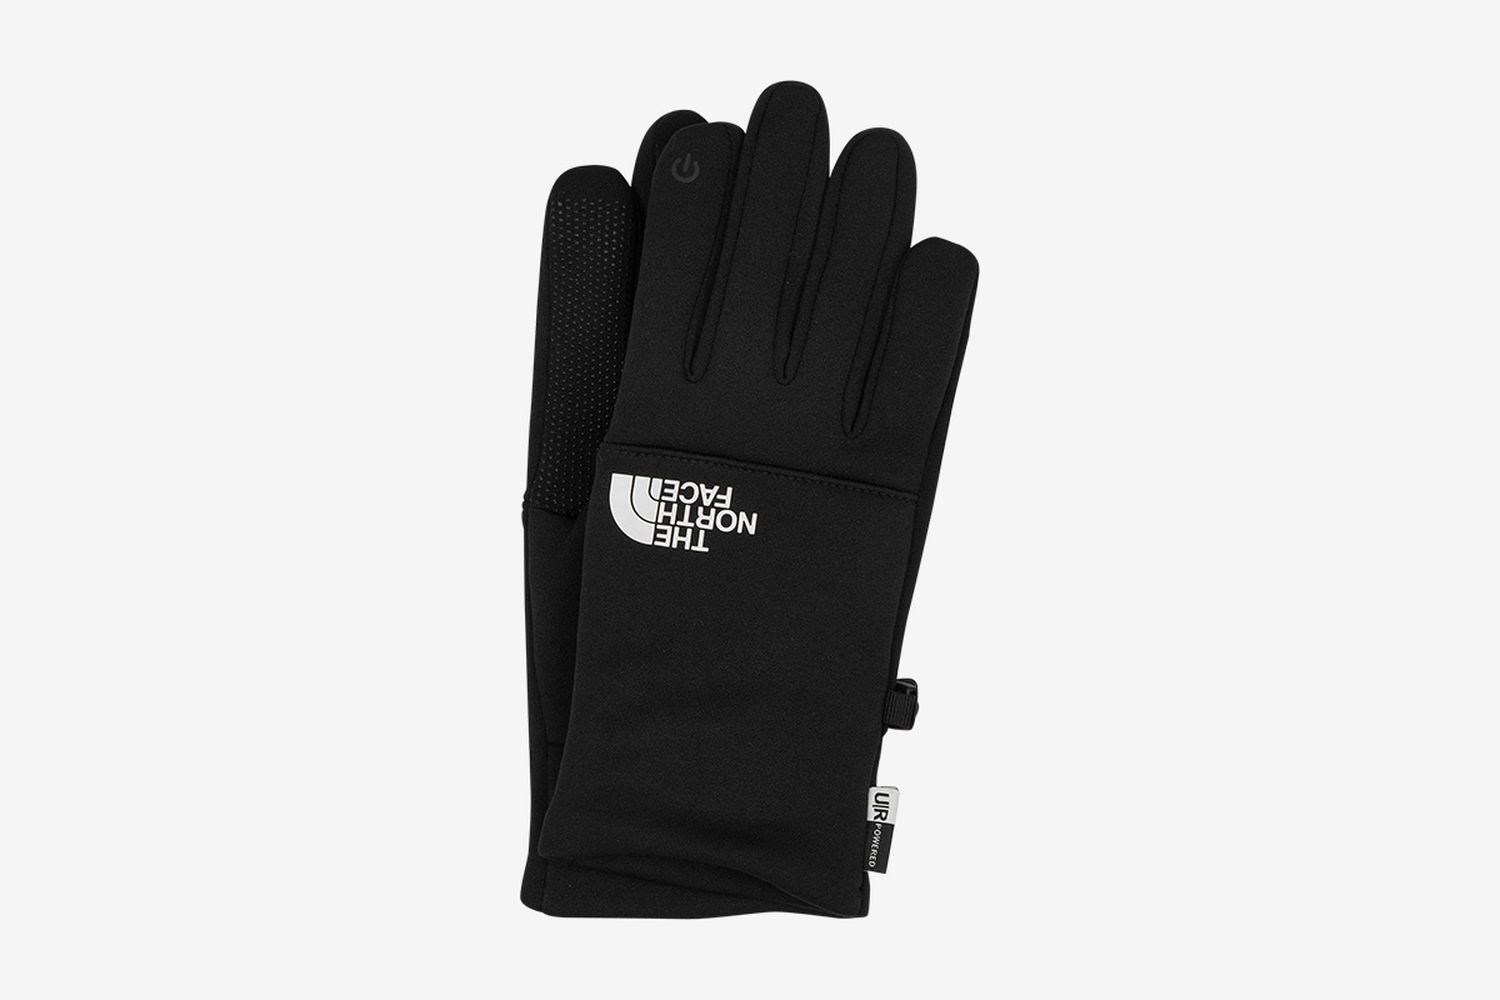 Etip Recycled Gloves